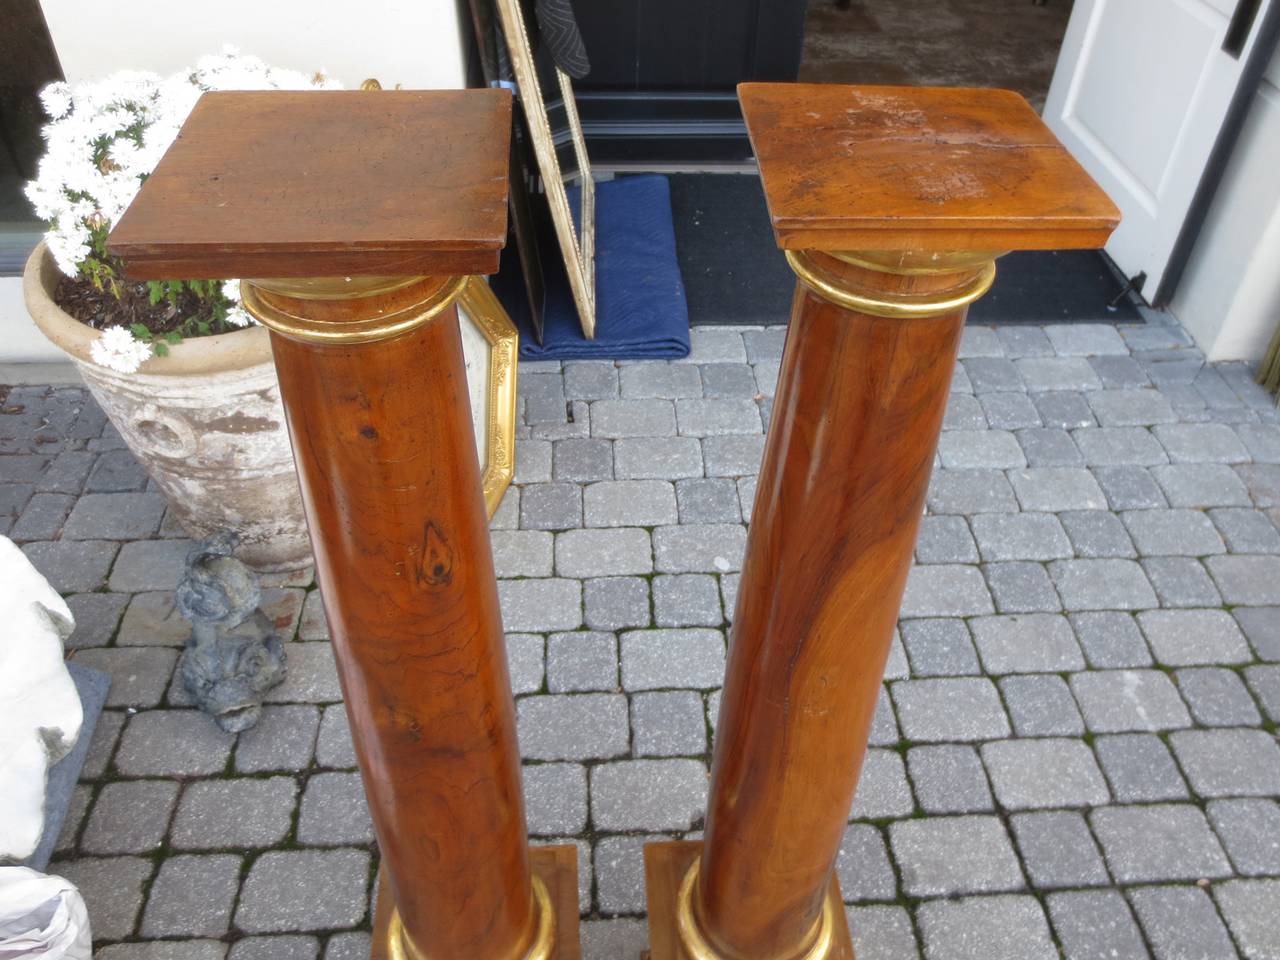 Pair of Fine 18th-19th century Italian Neoclassical Gilt and Walnut Columns,
Provence:From Gianni Versace's collection 